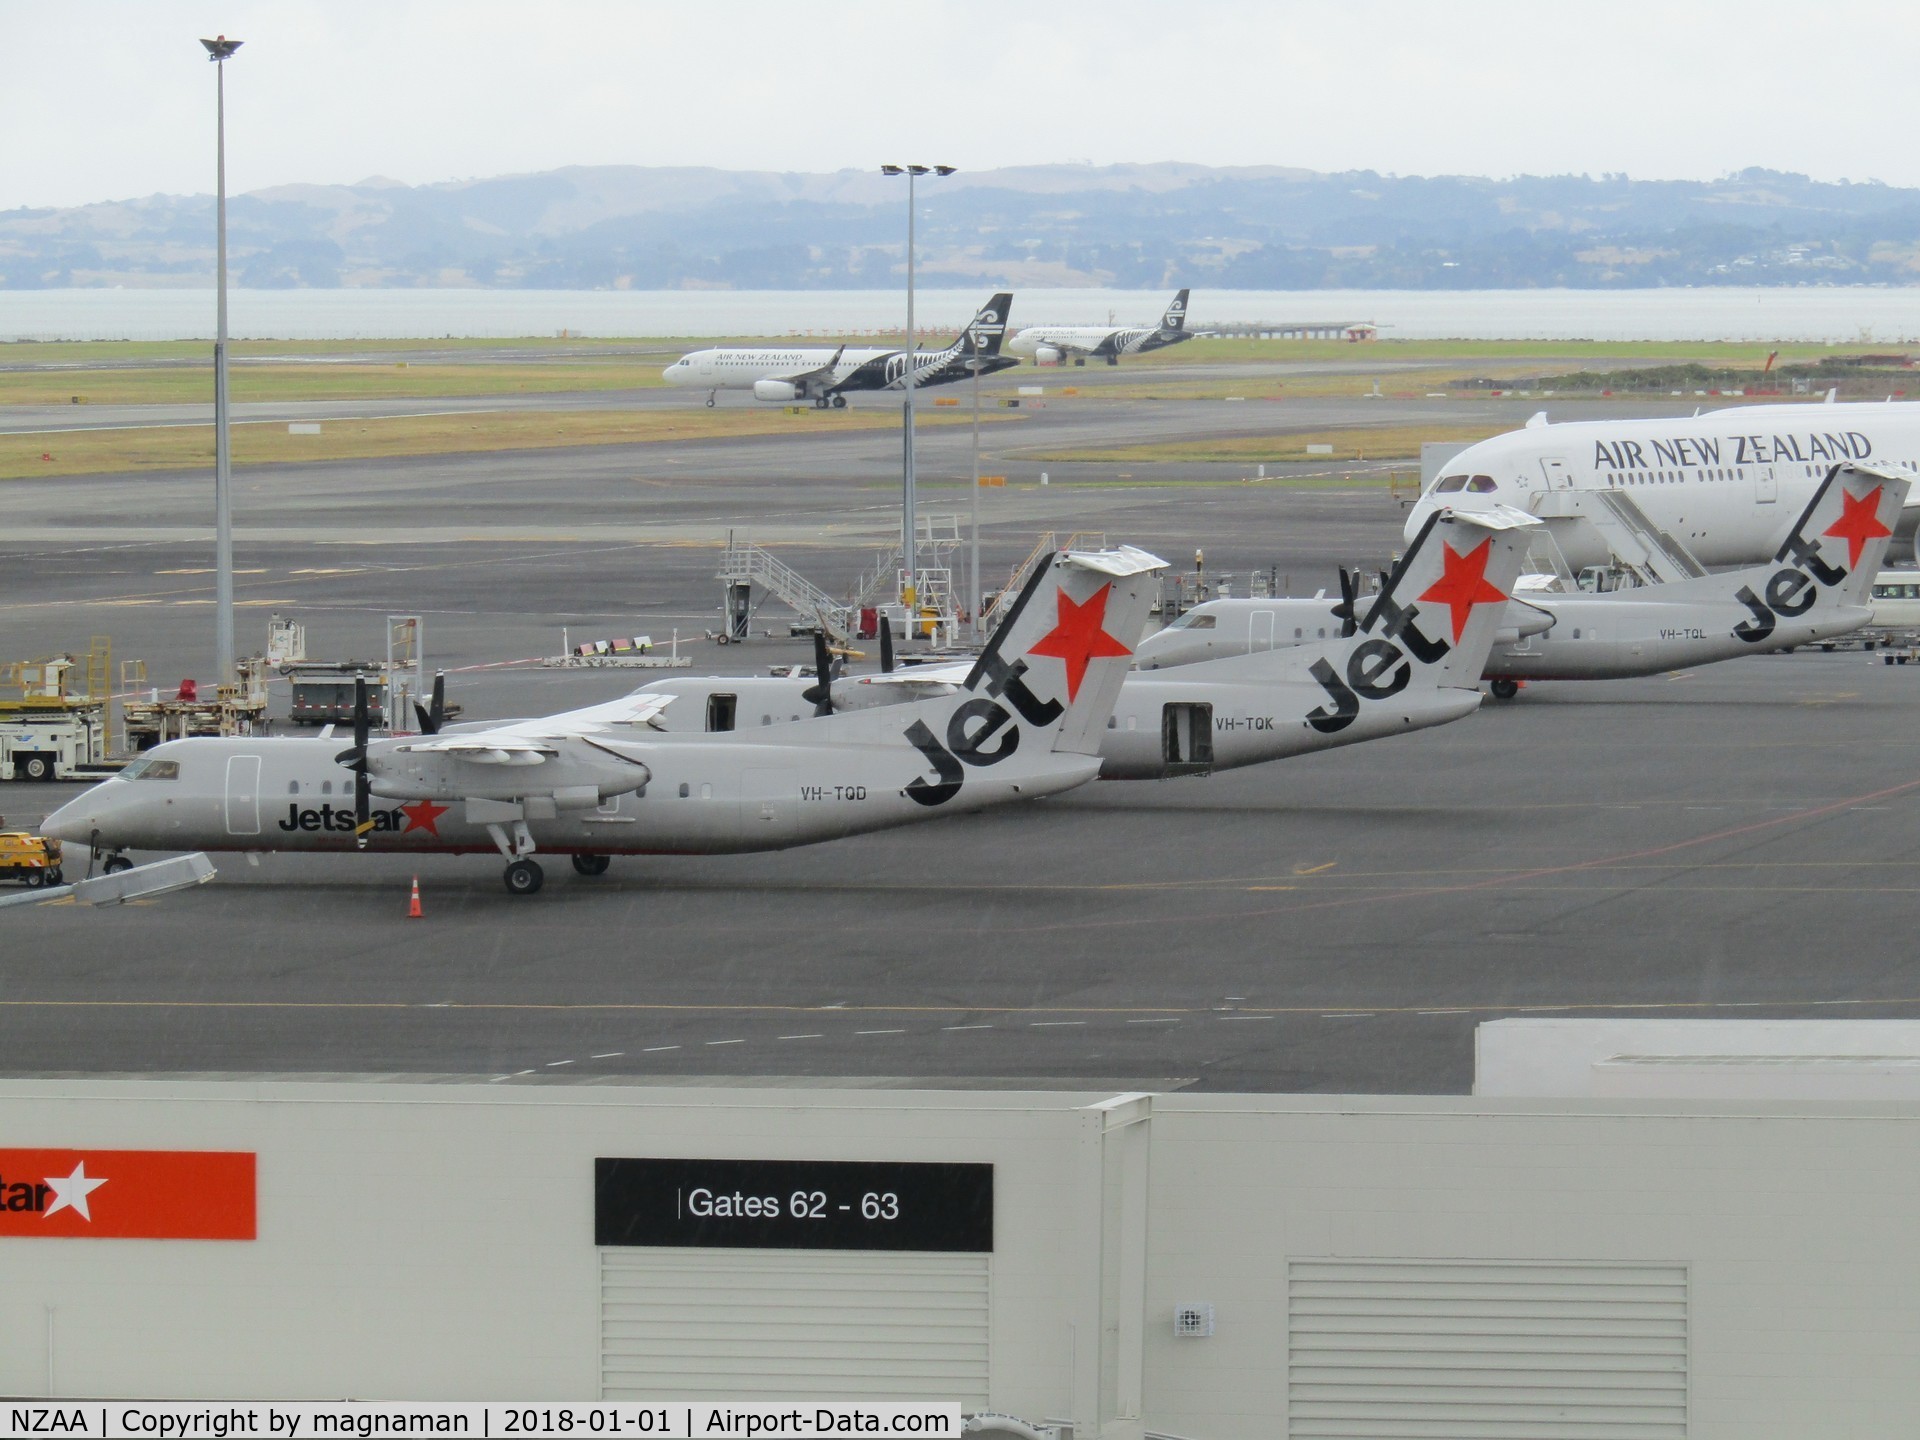 Auckland International Airport, Auckland New Zealand (NZAA) - triple trouble on ramp at AKL